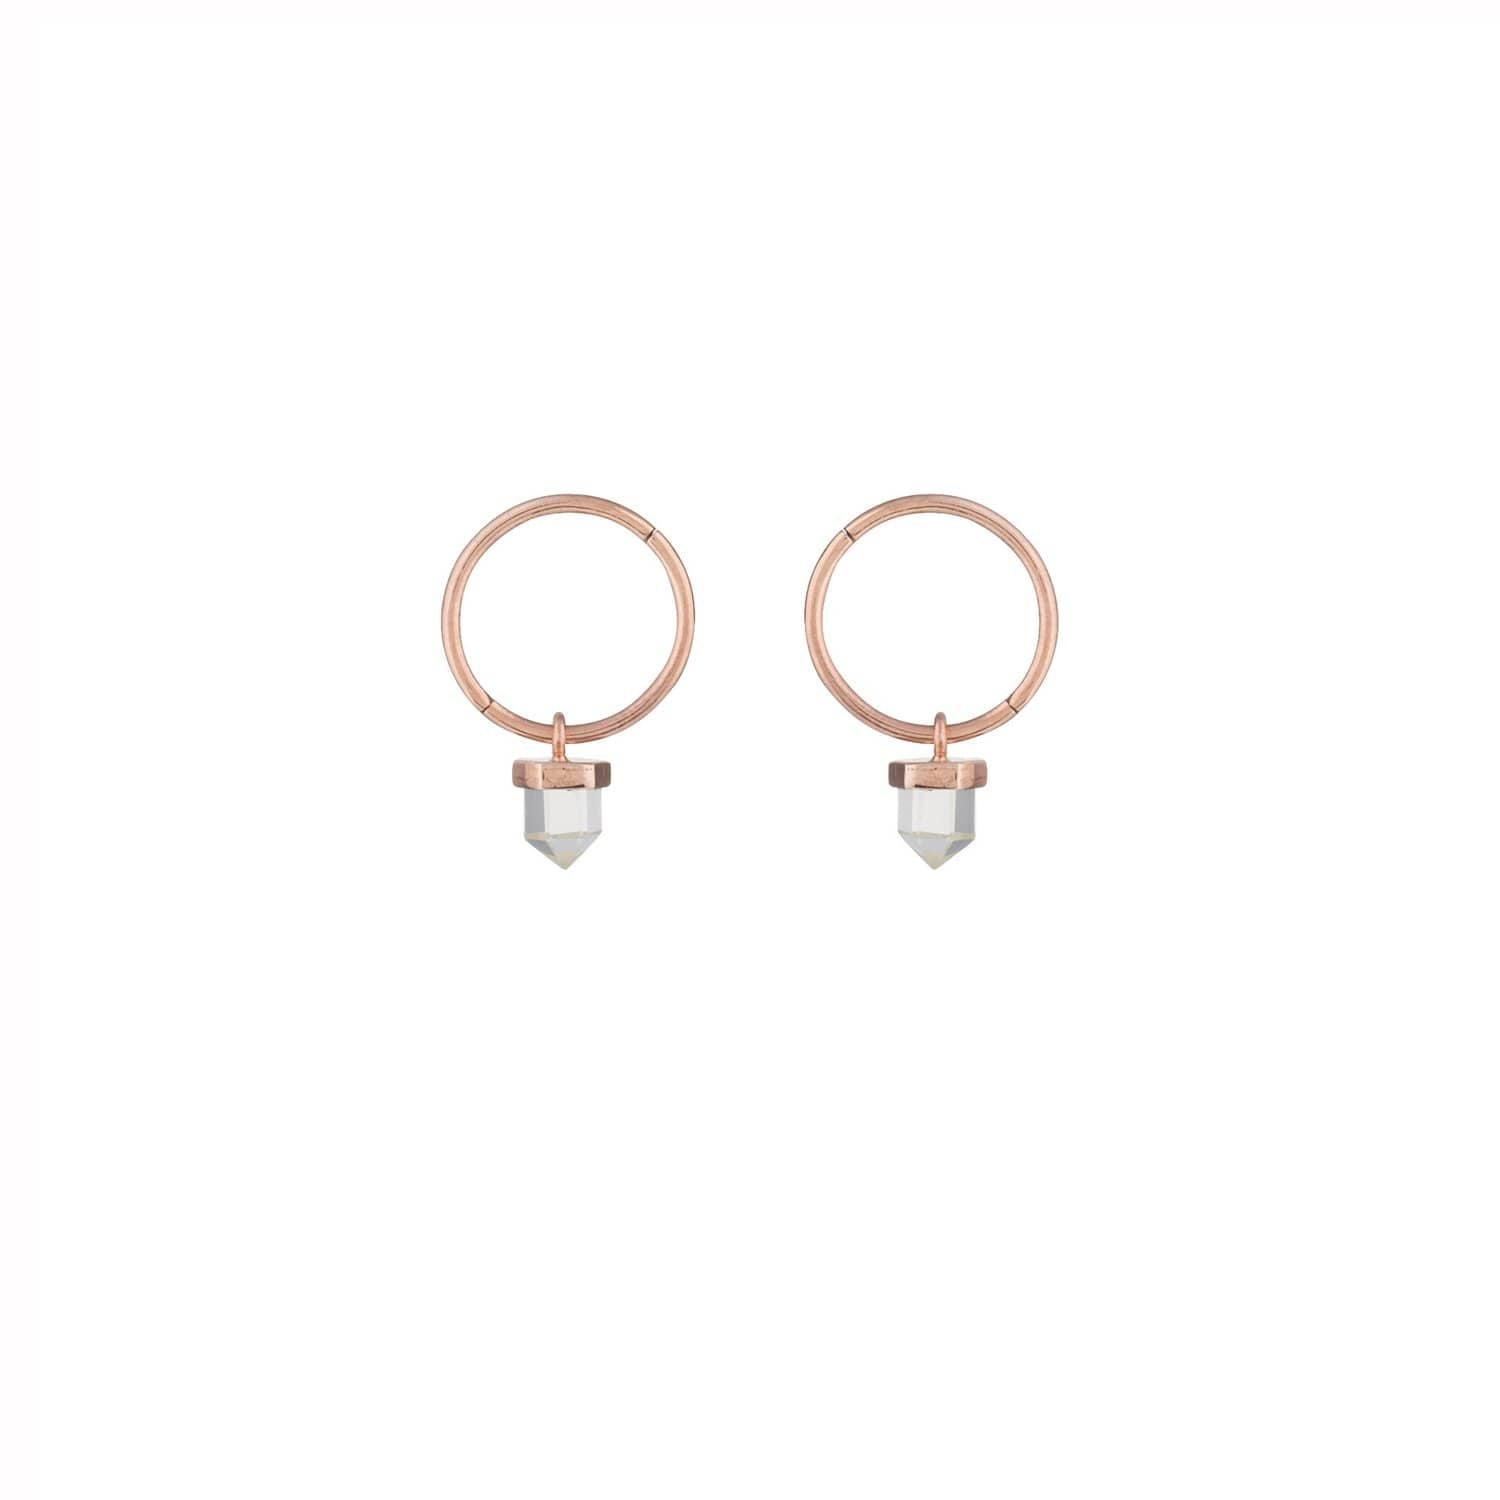 clear quartz sleepers 24K Rose Gold Plated by Krystle Knight